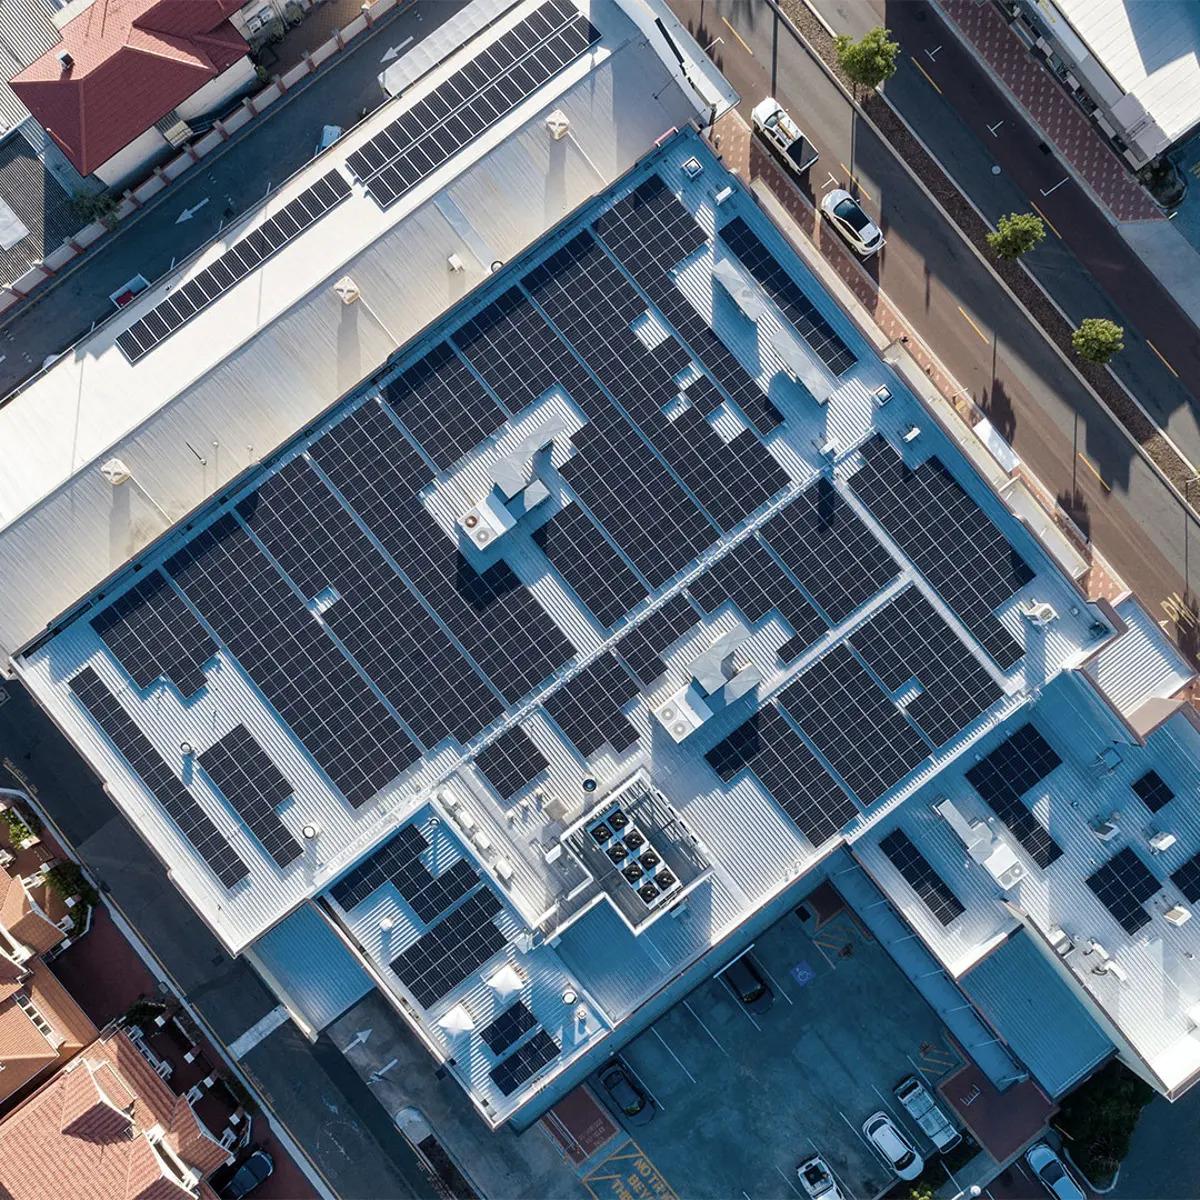 Aerial view of a rooftop solar system.